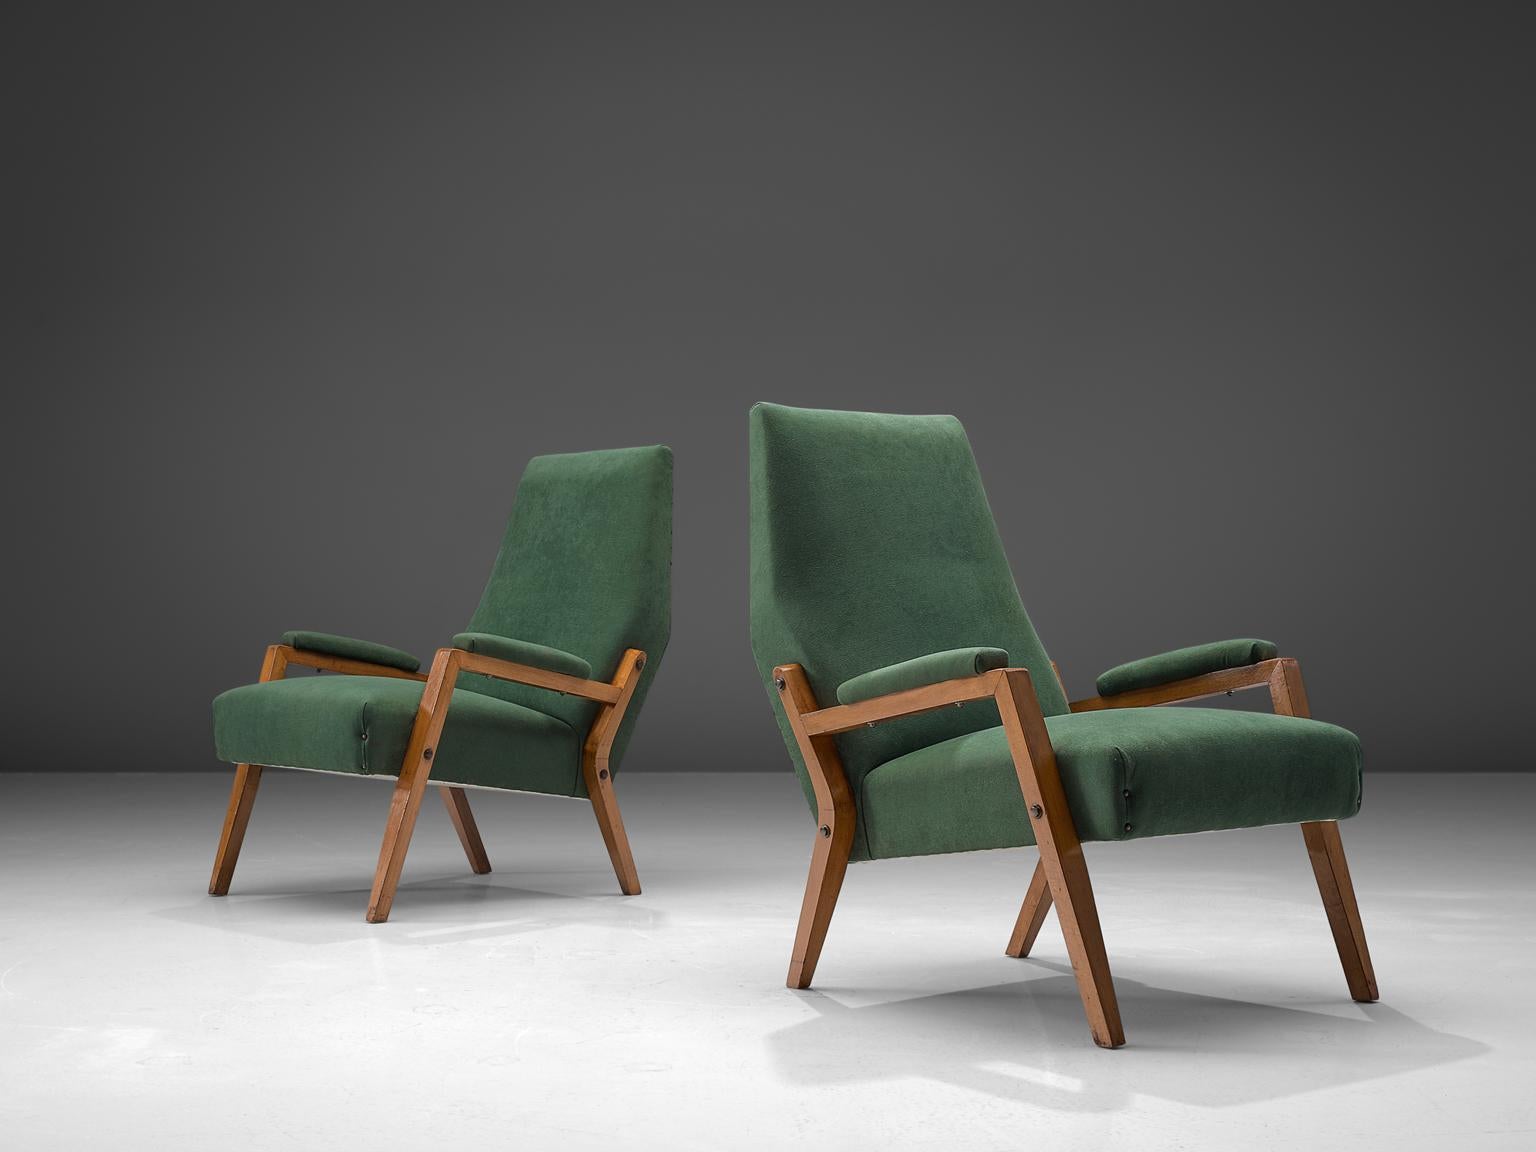 Pair of easy chairs, fabric, stained beech, metal, Italy, 1950s

This exceptional pair of armchairs designed and crafted in Italy is defined by its pronounced geometry and harmonious blend of textures and materials. The lounge chair showcases an